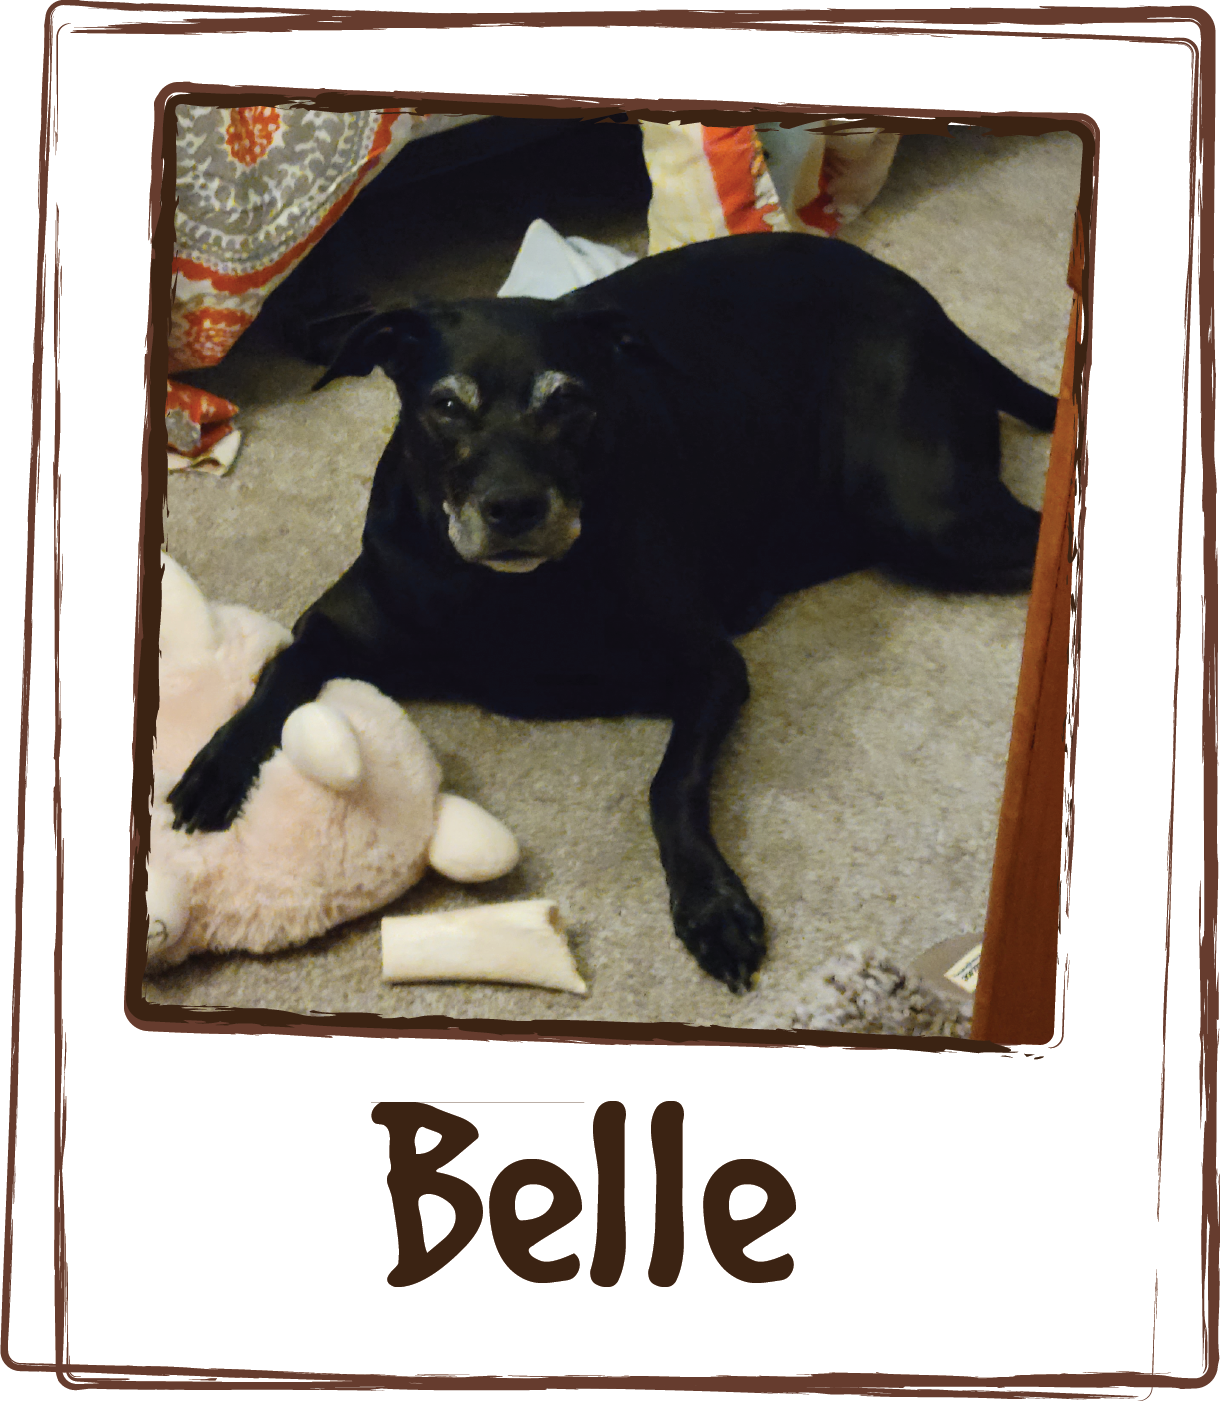  “Belle s 10 years old and developed a severe infection in her lymphnodes about a year ago. After spending thousands at 3 different vetrenarians and 9 months of different antibiotics, steroids and blood work, nothing was helping. In fact it kept gett